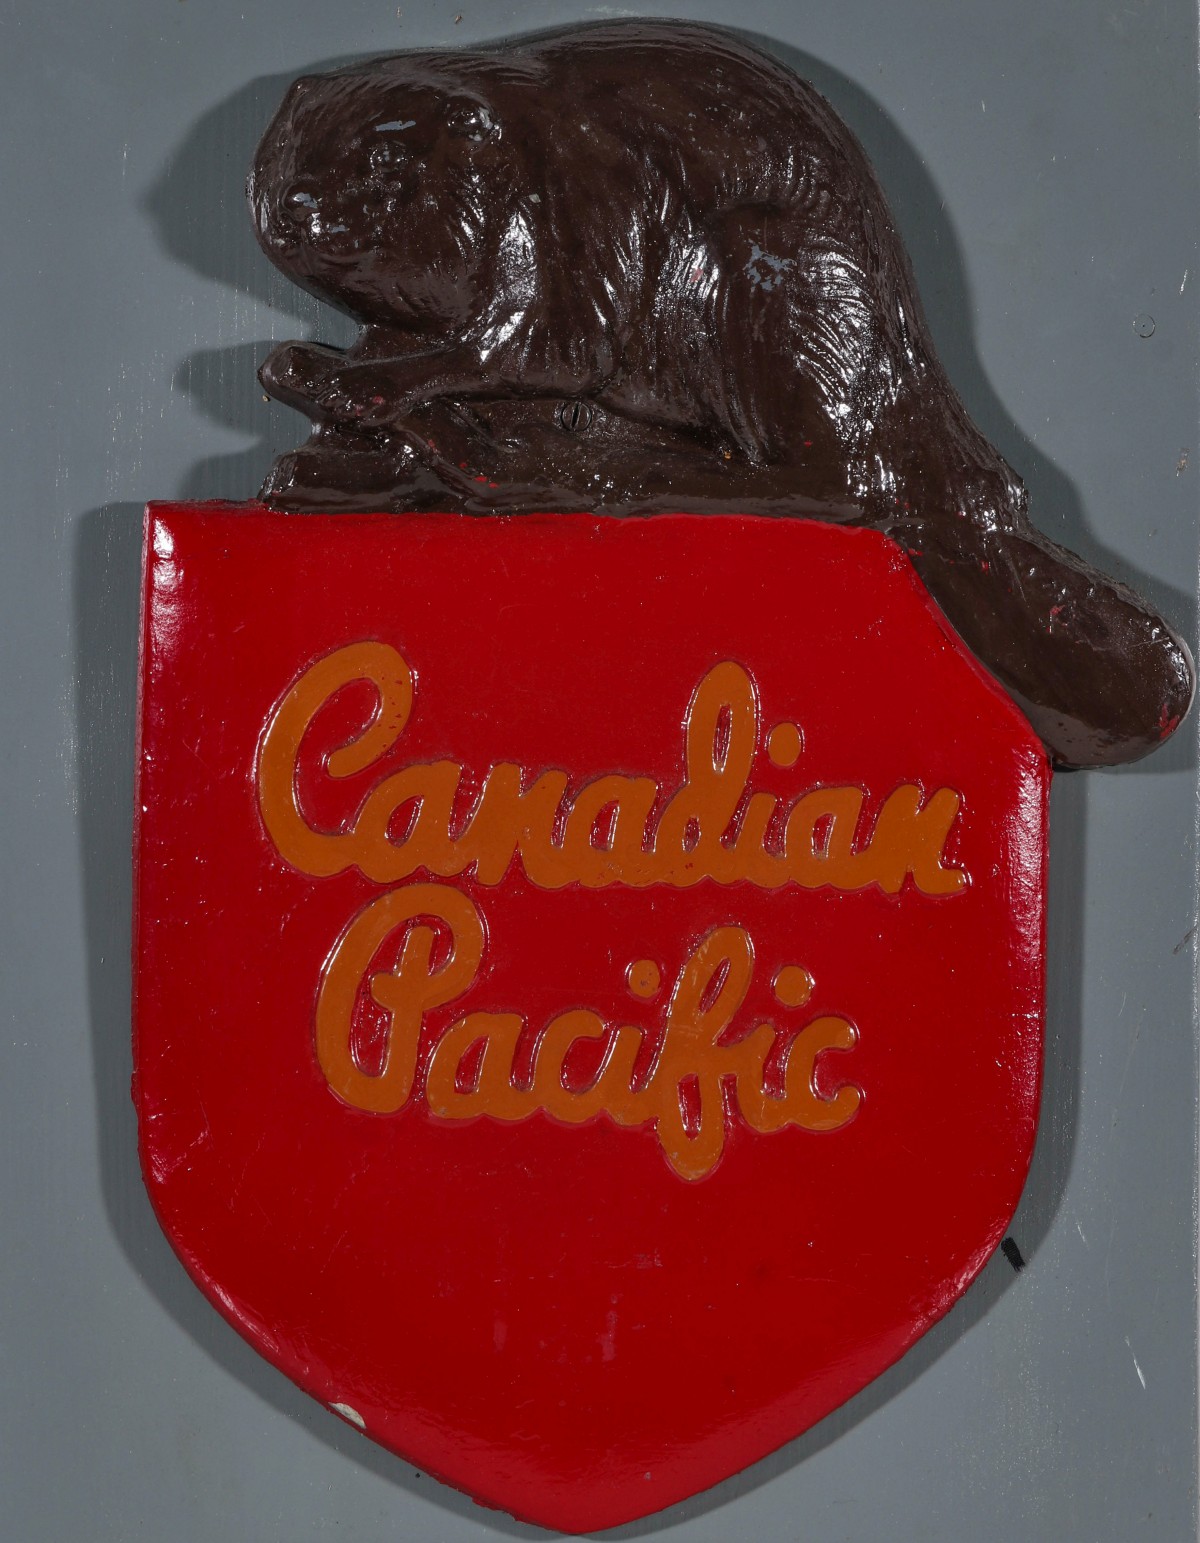 A CANADIAN PACIFIC RR LOGO PLAQUE FOR THE ACADIAN ROOM